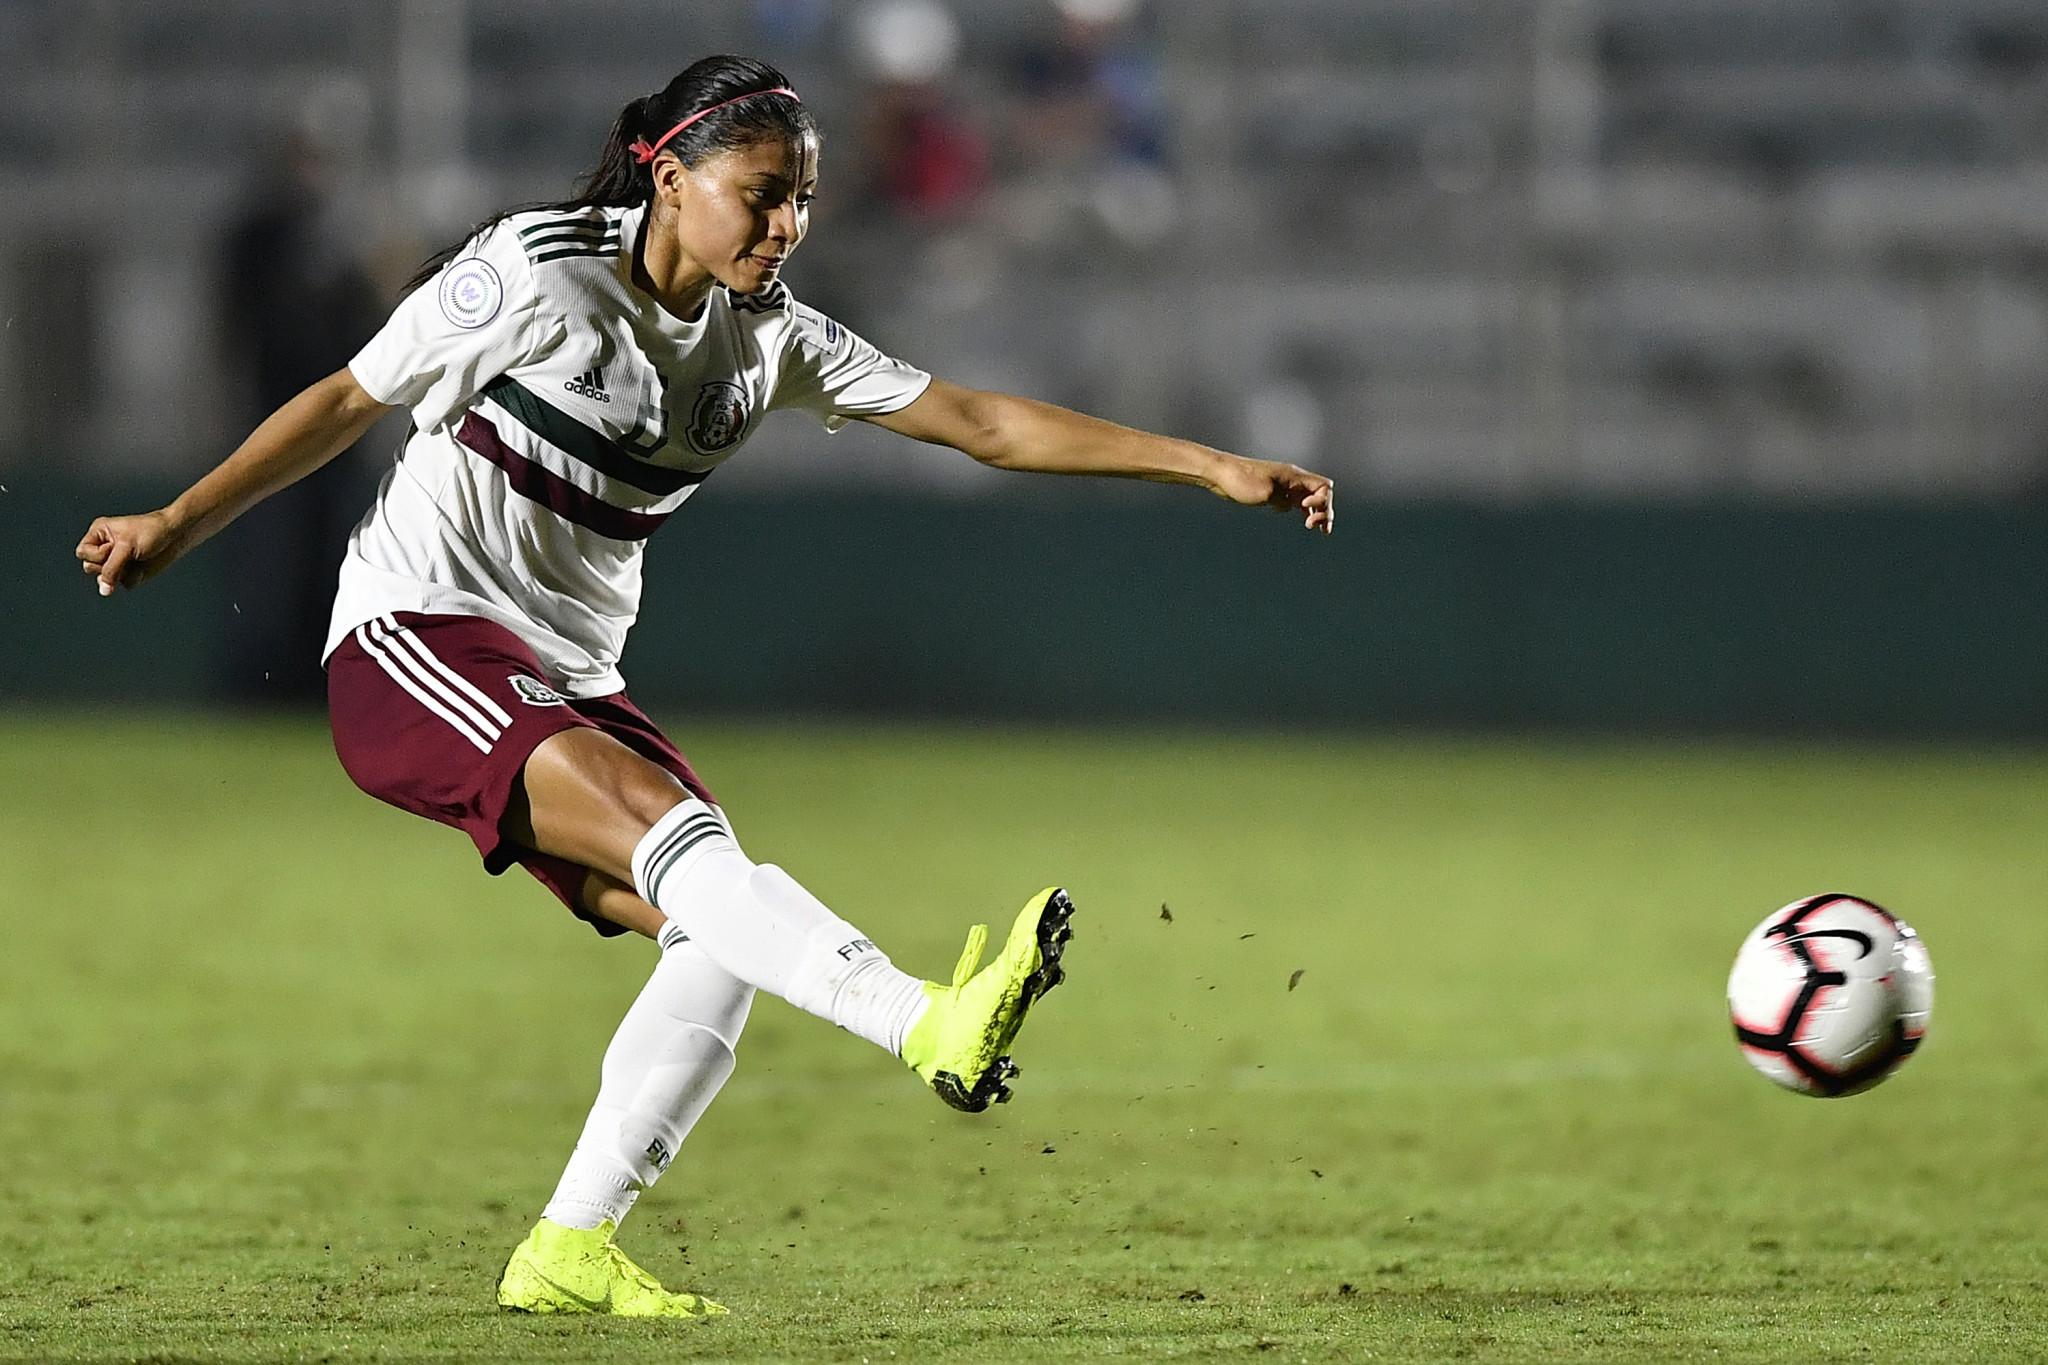 United States qualify for knockout stages of CONCACAF Women's Championship